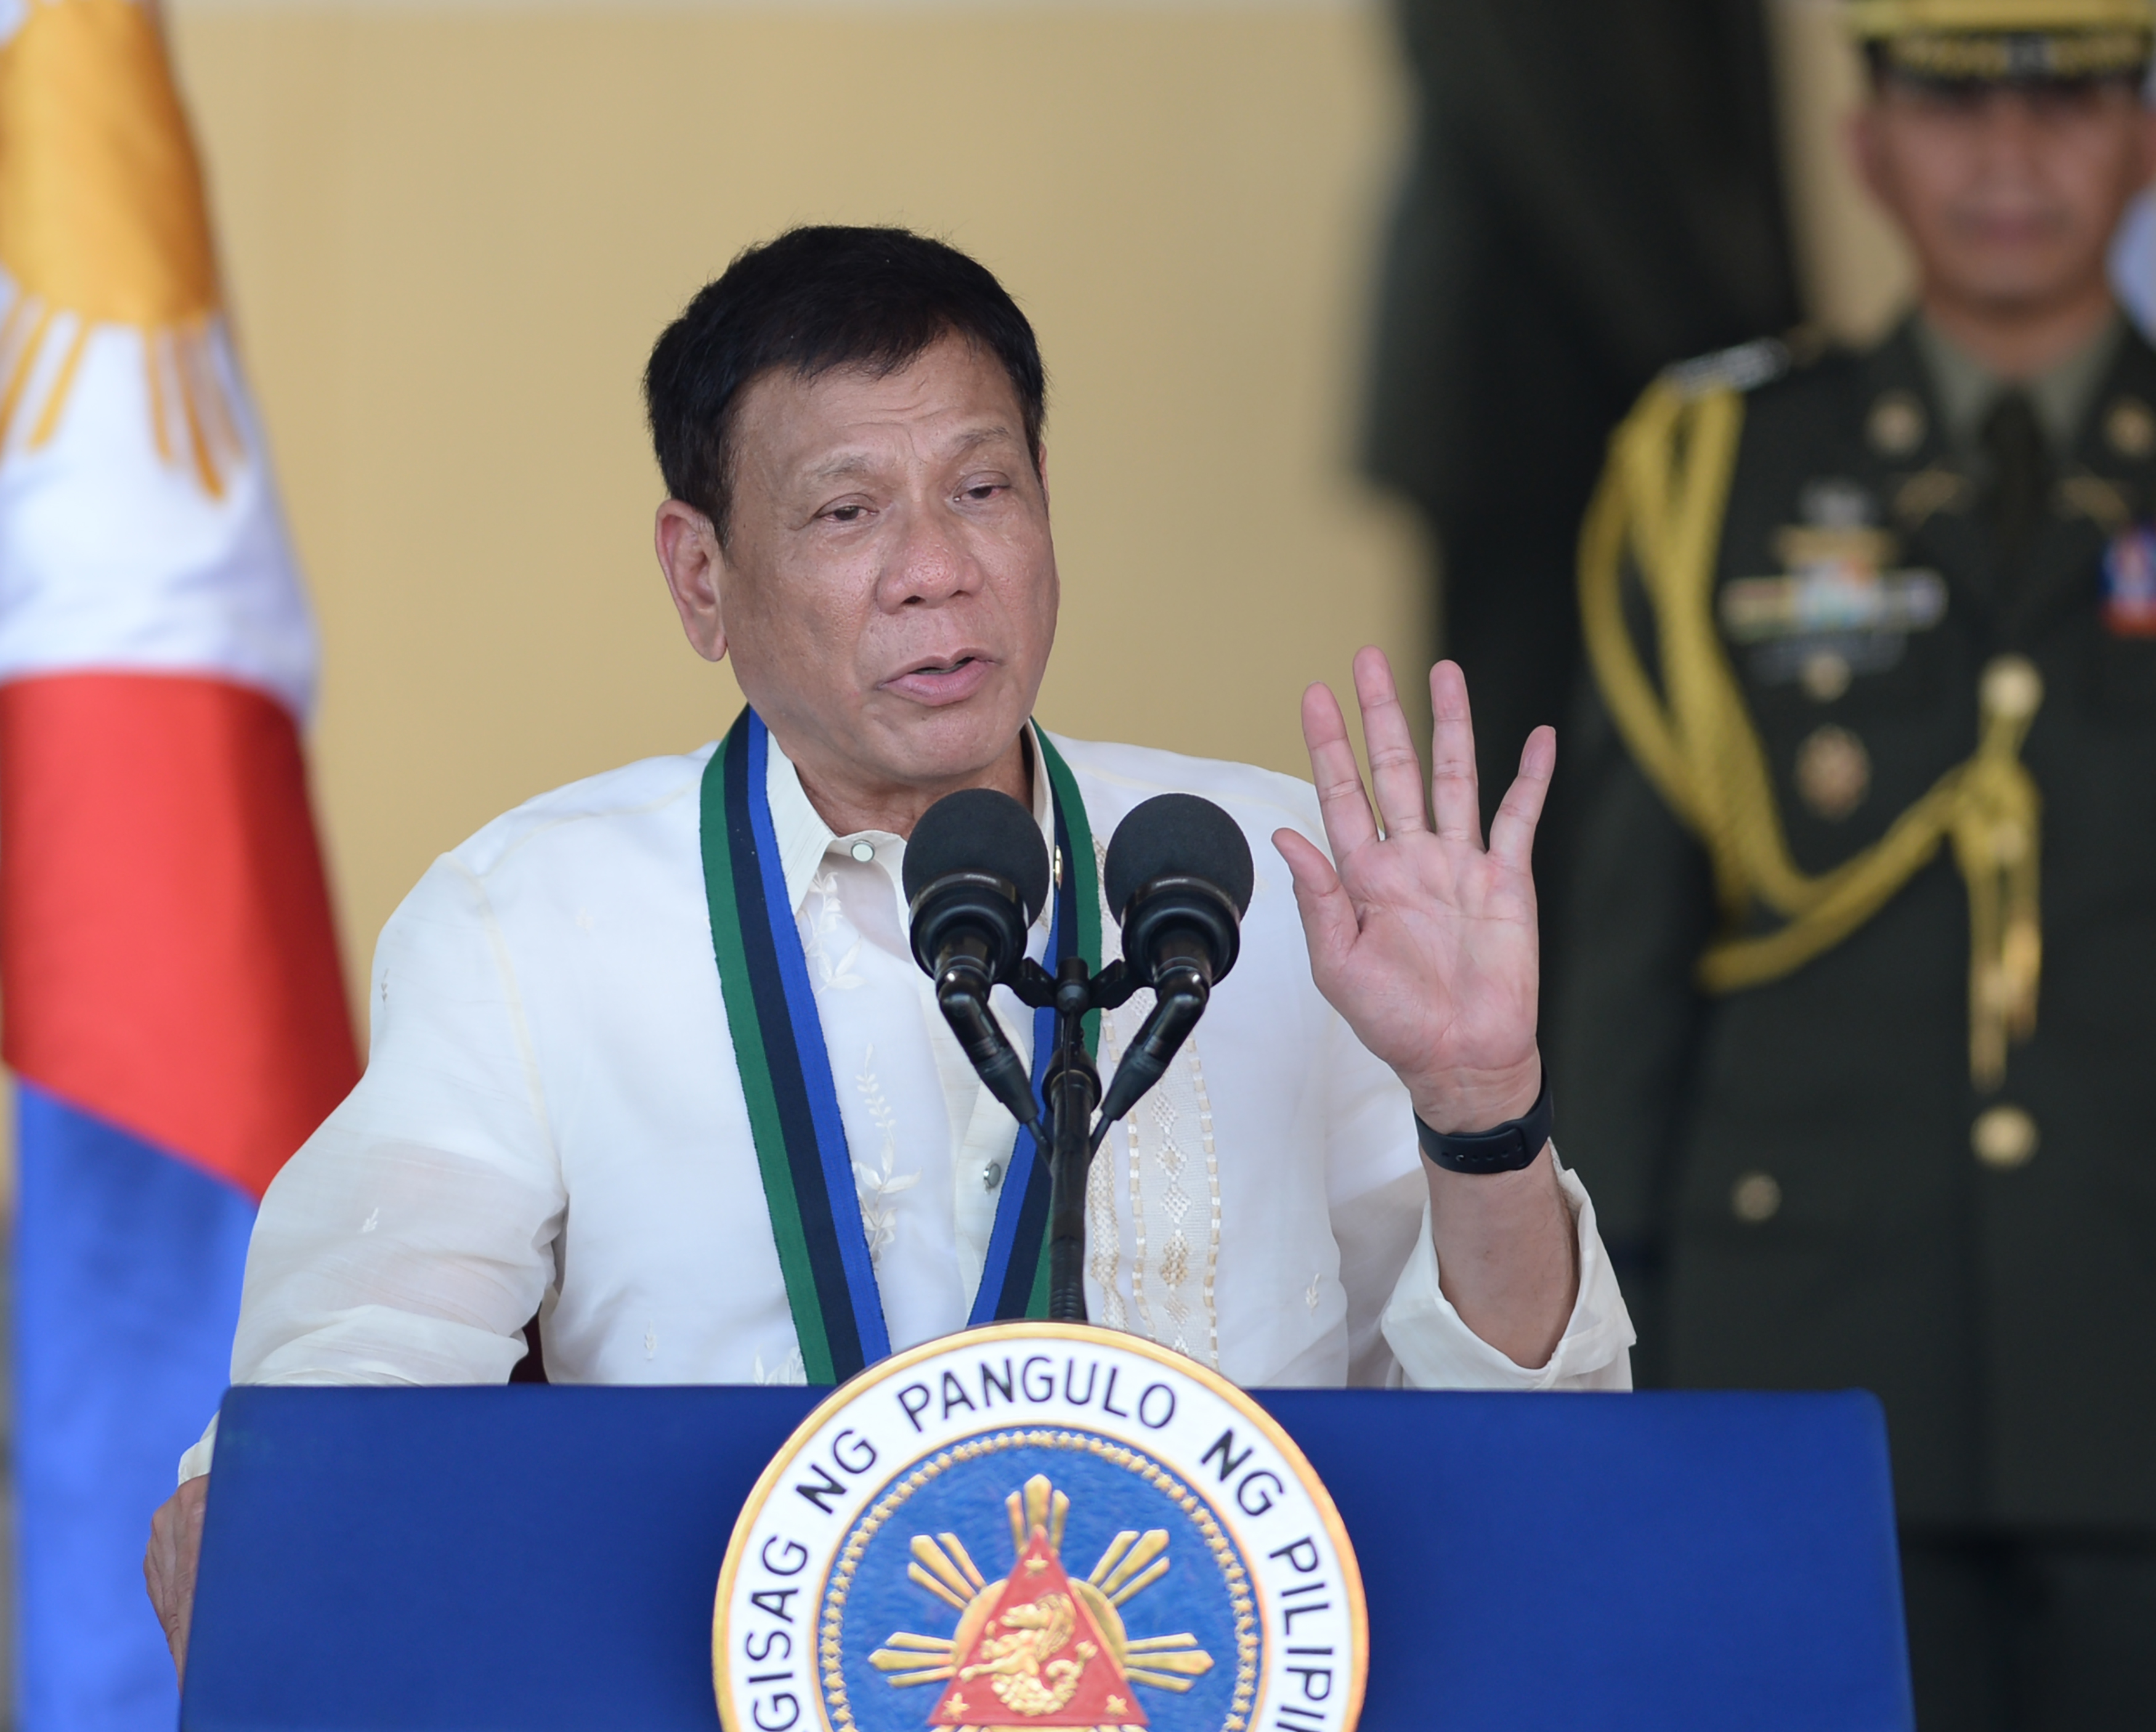 Philippines President Rodrigo Duterte gestures as he delivers his speech during a military parade at the military headquarters in Manila on July 1, 2016. Duterte was sworn in as the Philippines' president June 30 -- and quickly launched a foul-mouthed vow to wipe out drug traffickers and even urged ordinary Filipinos to kill addicts. / AFP PHOTO / TED ALJIBE